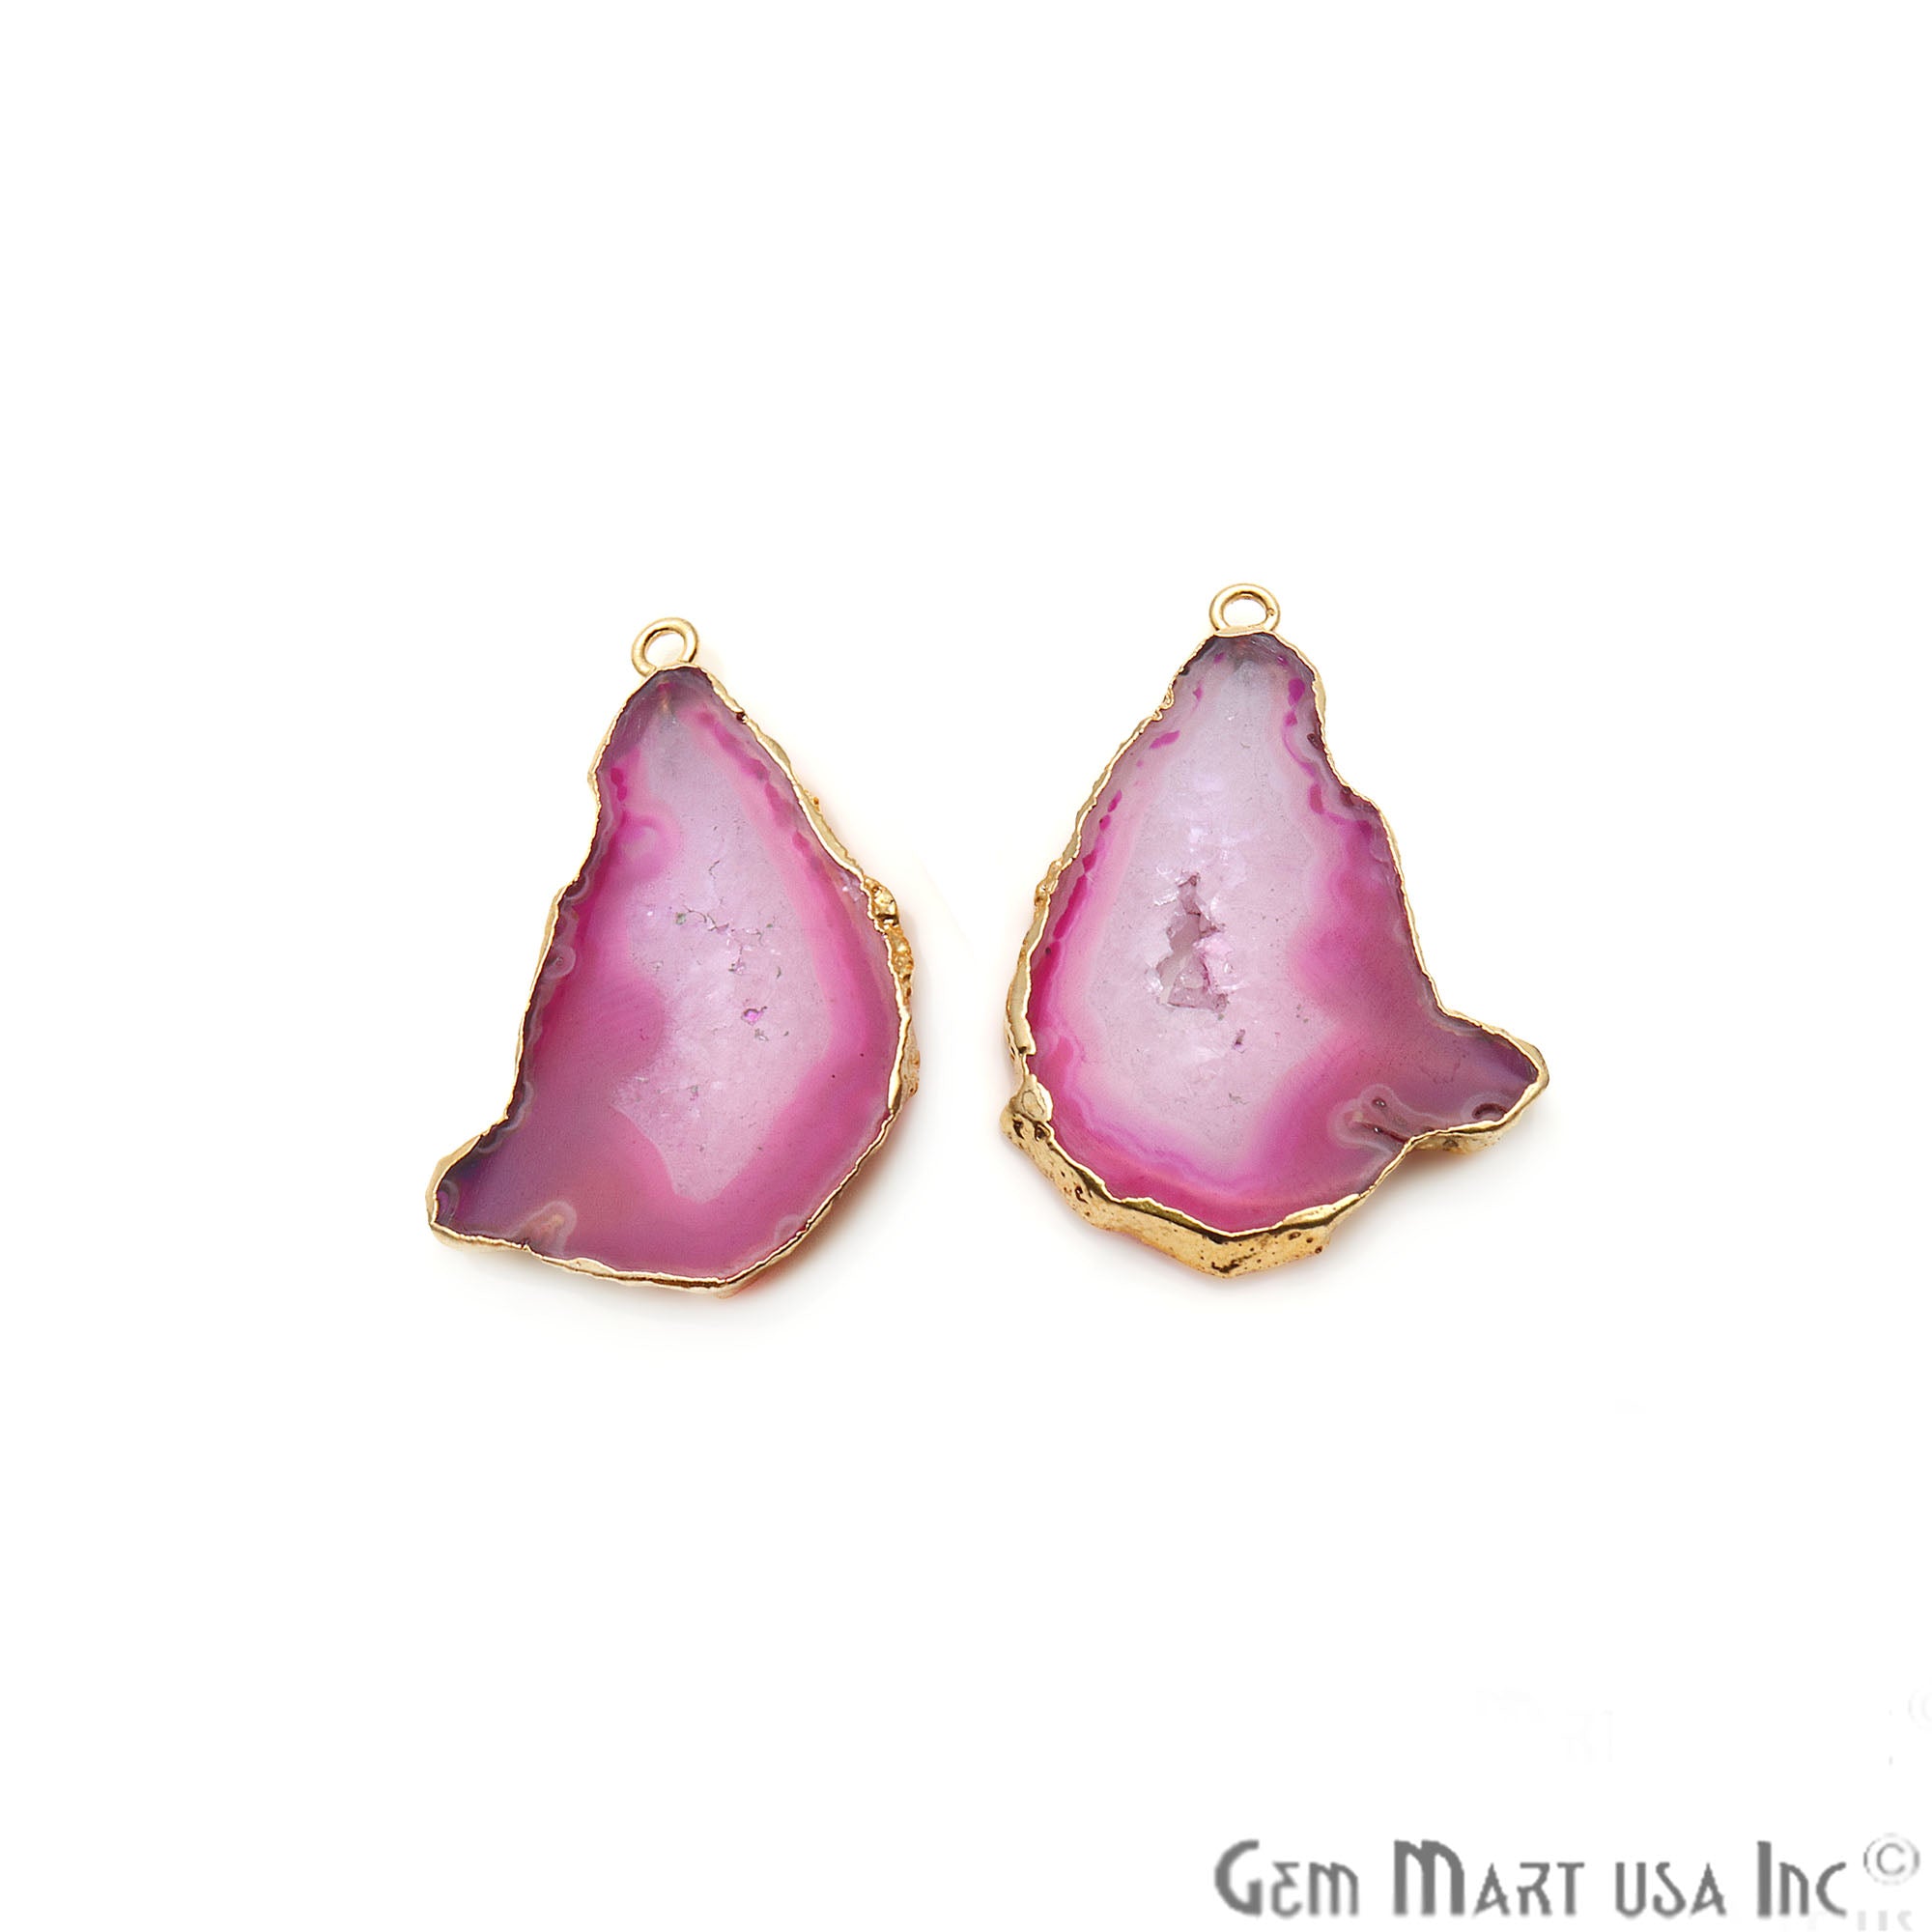 Agate Slice 38x26mm Organic Gold Electroplated Gemstone Earring Connector 1 Pair - GemMartUSA